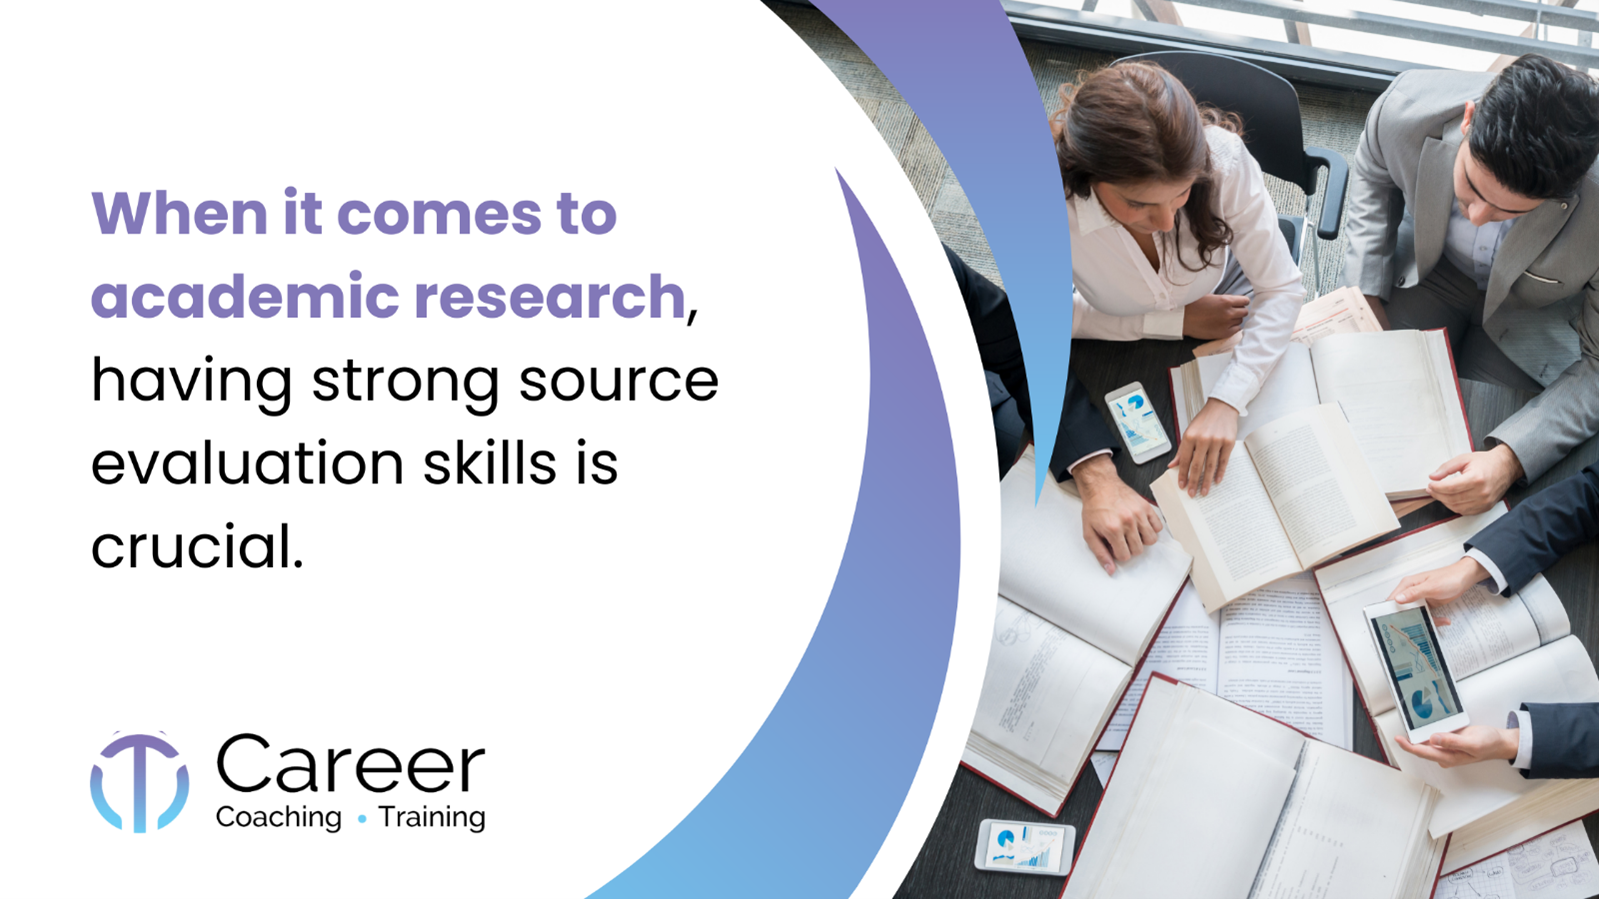 When it comes to academic research, having strong source evaluation skills is crucial.